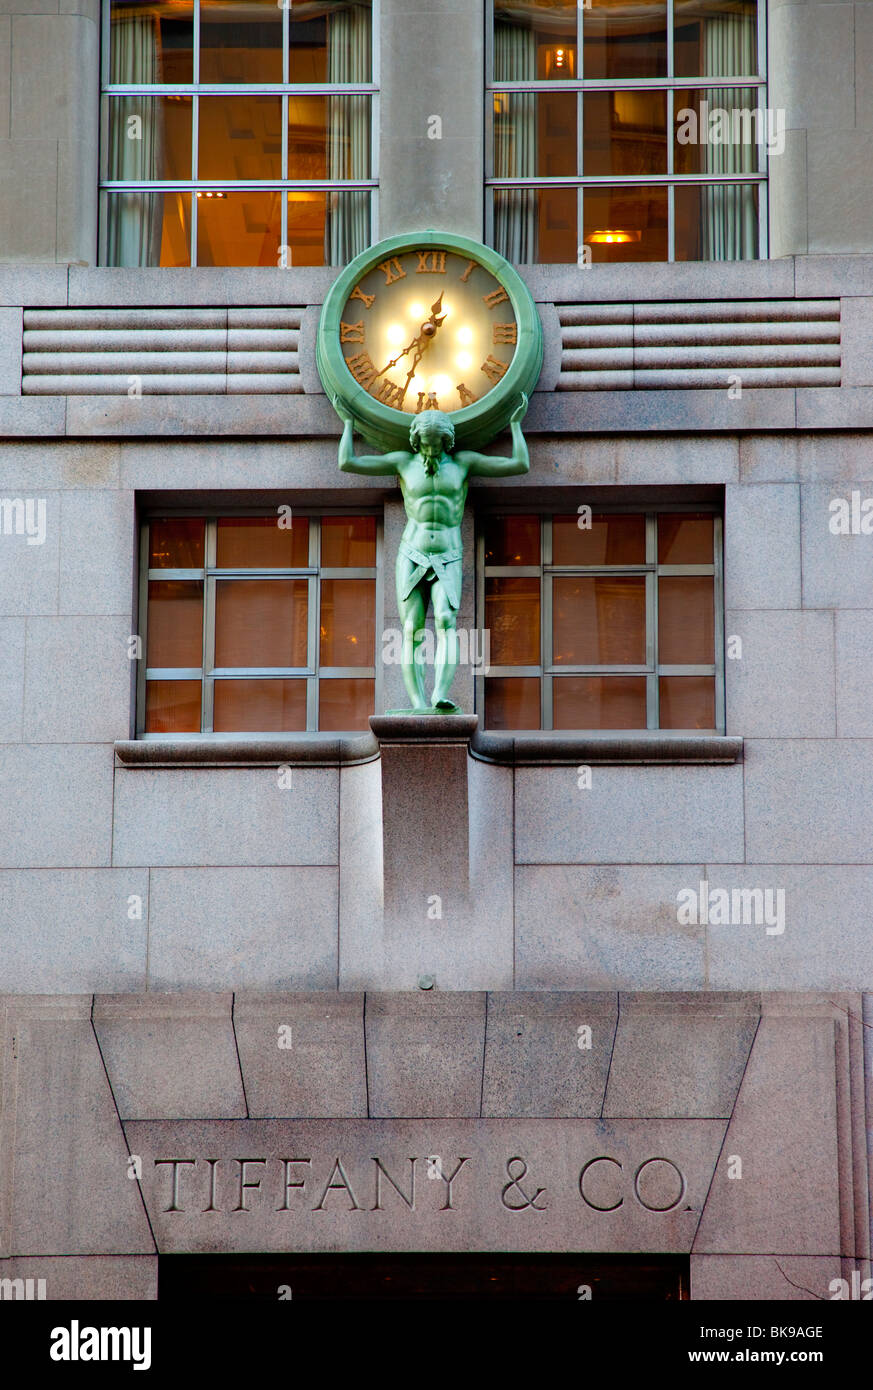 The Tiffany clock on the side of the famous luxury shop on 5th Avenue in Manhattan, New York City USA Stock Photo